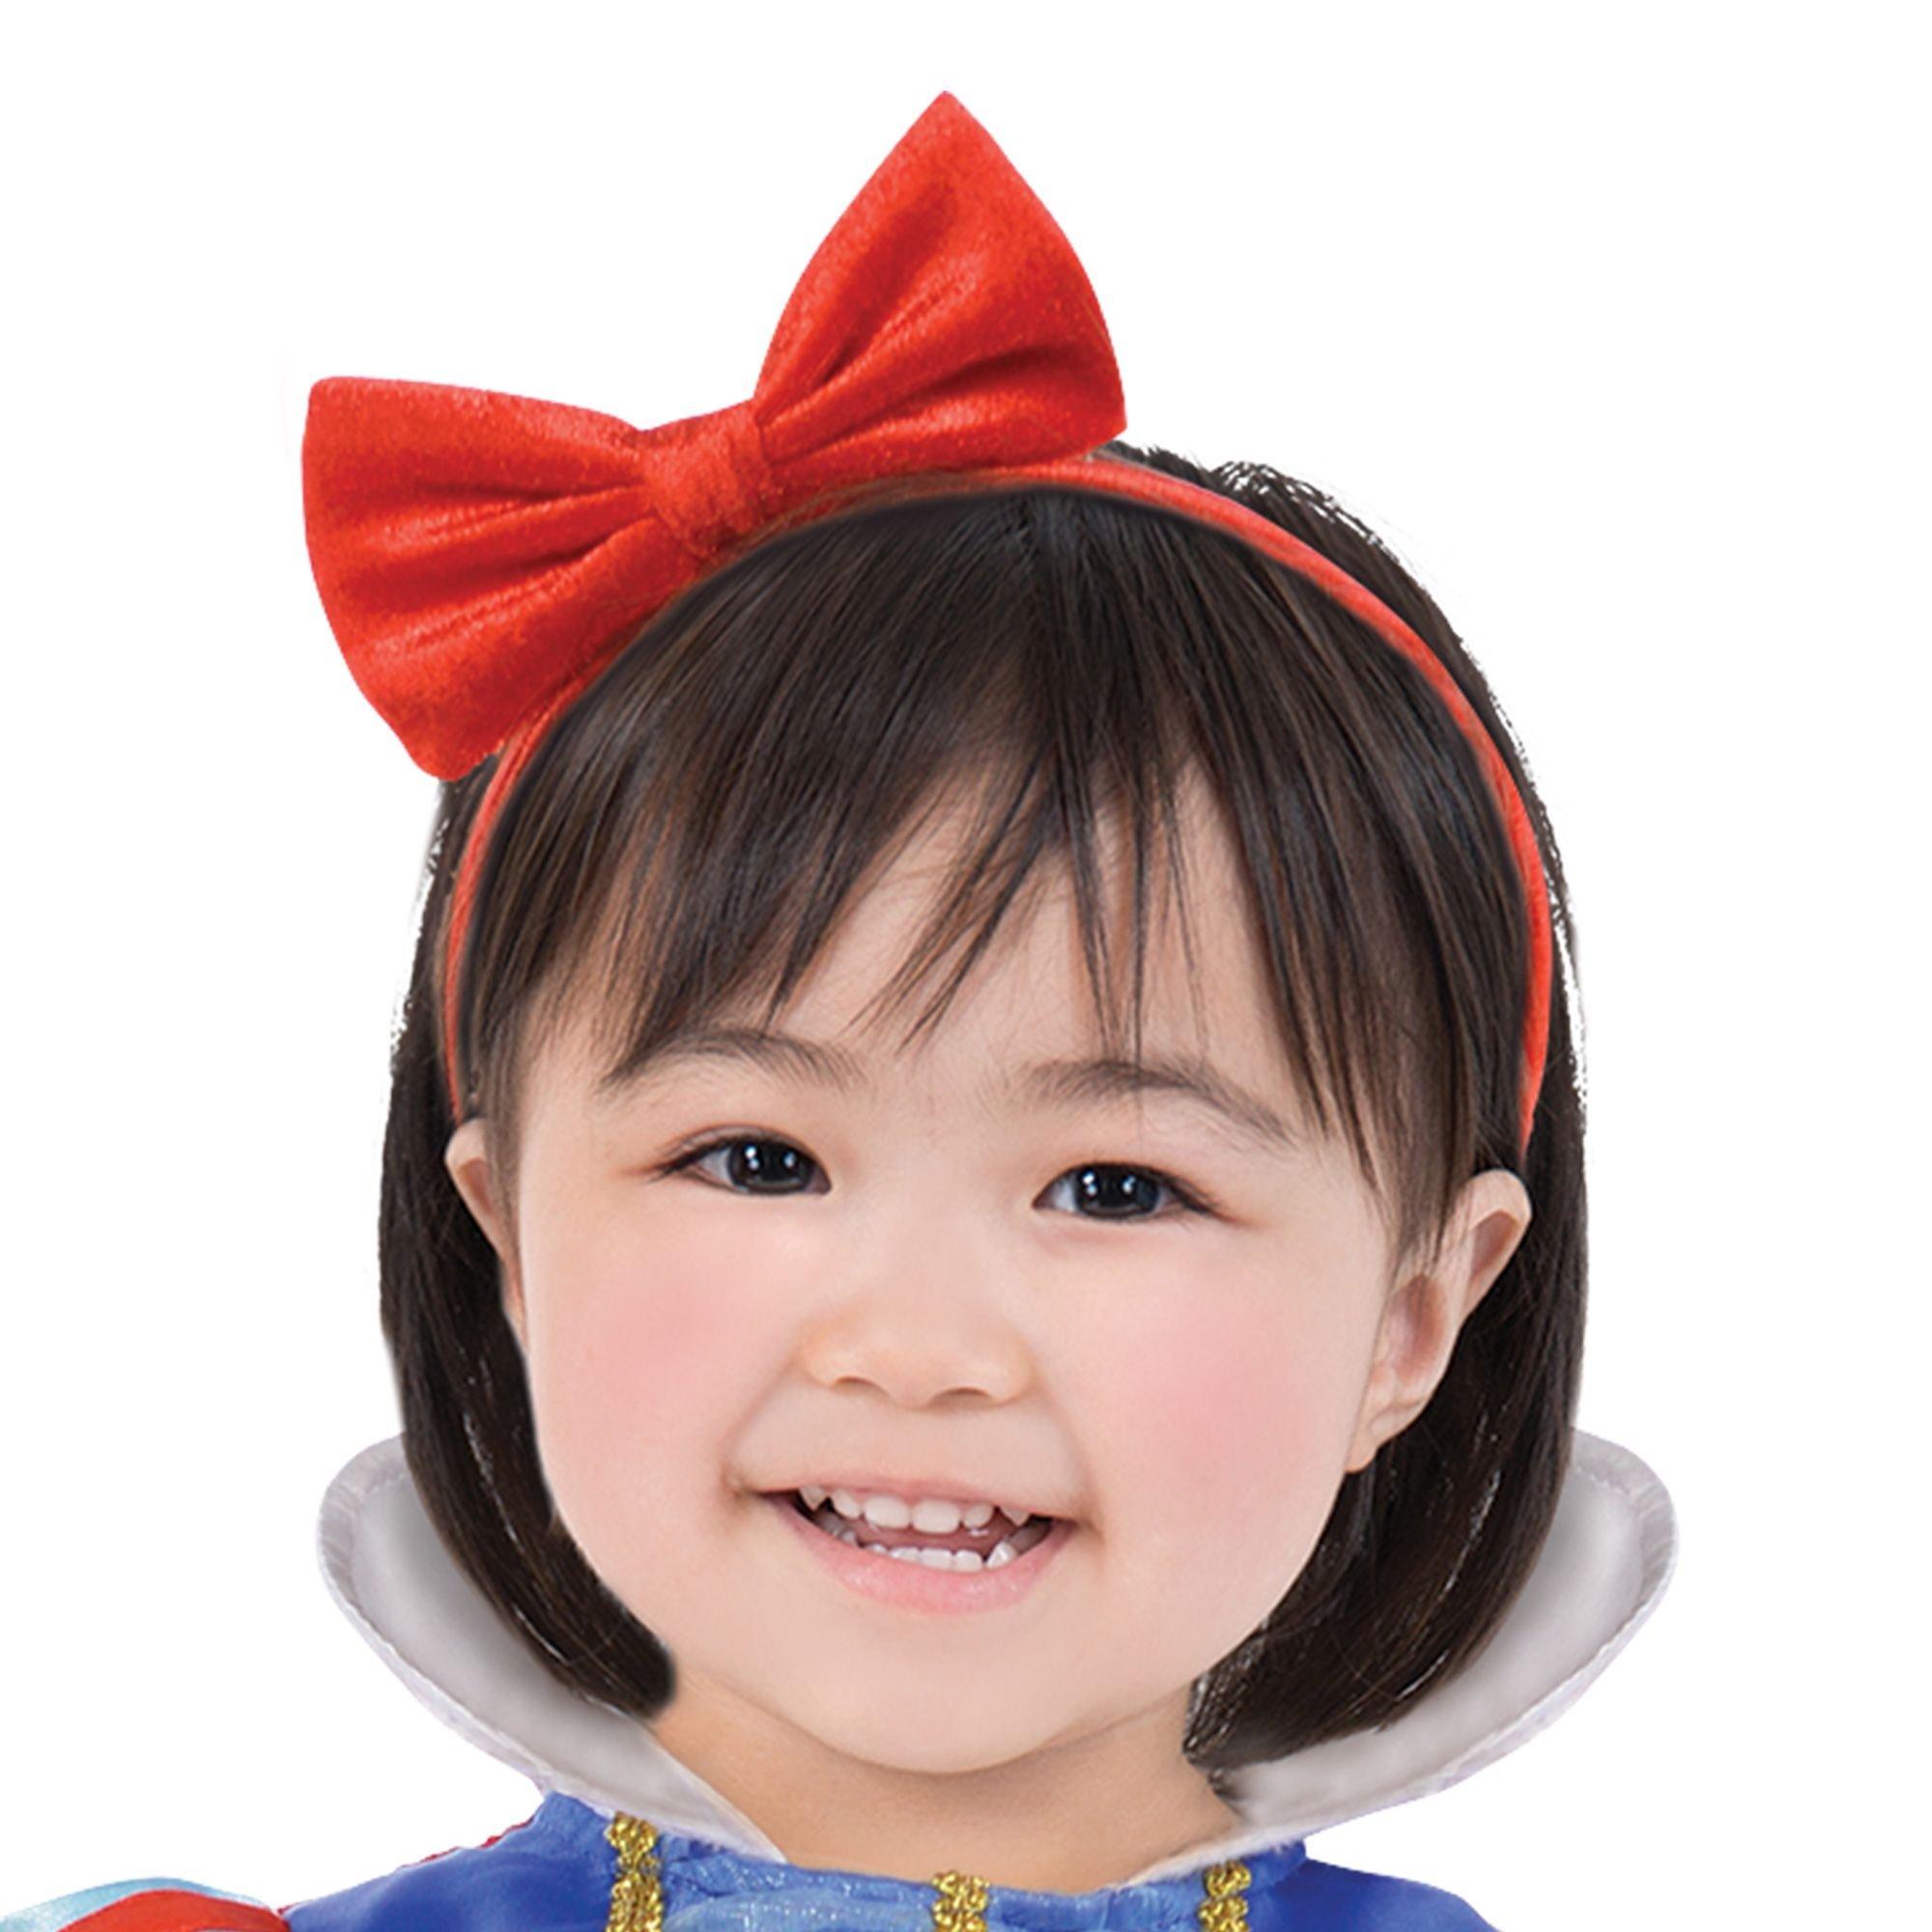 Baby Girls Classic Snow White Costume | Party City